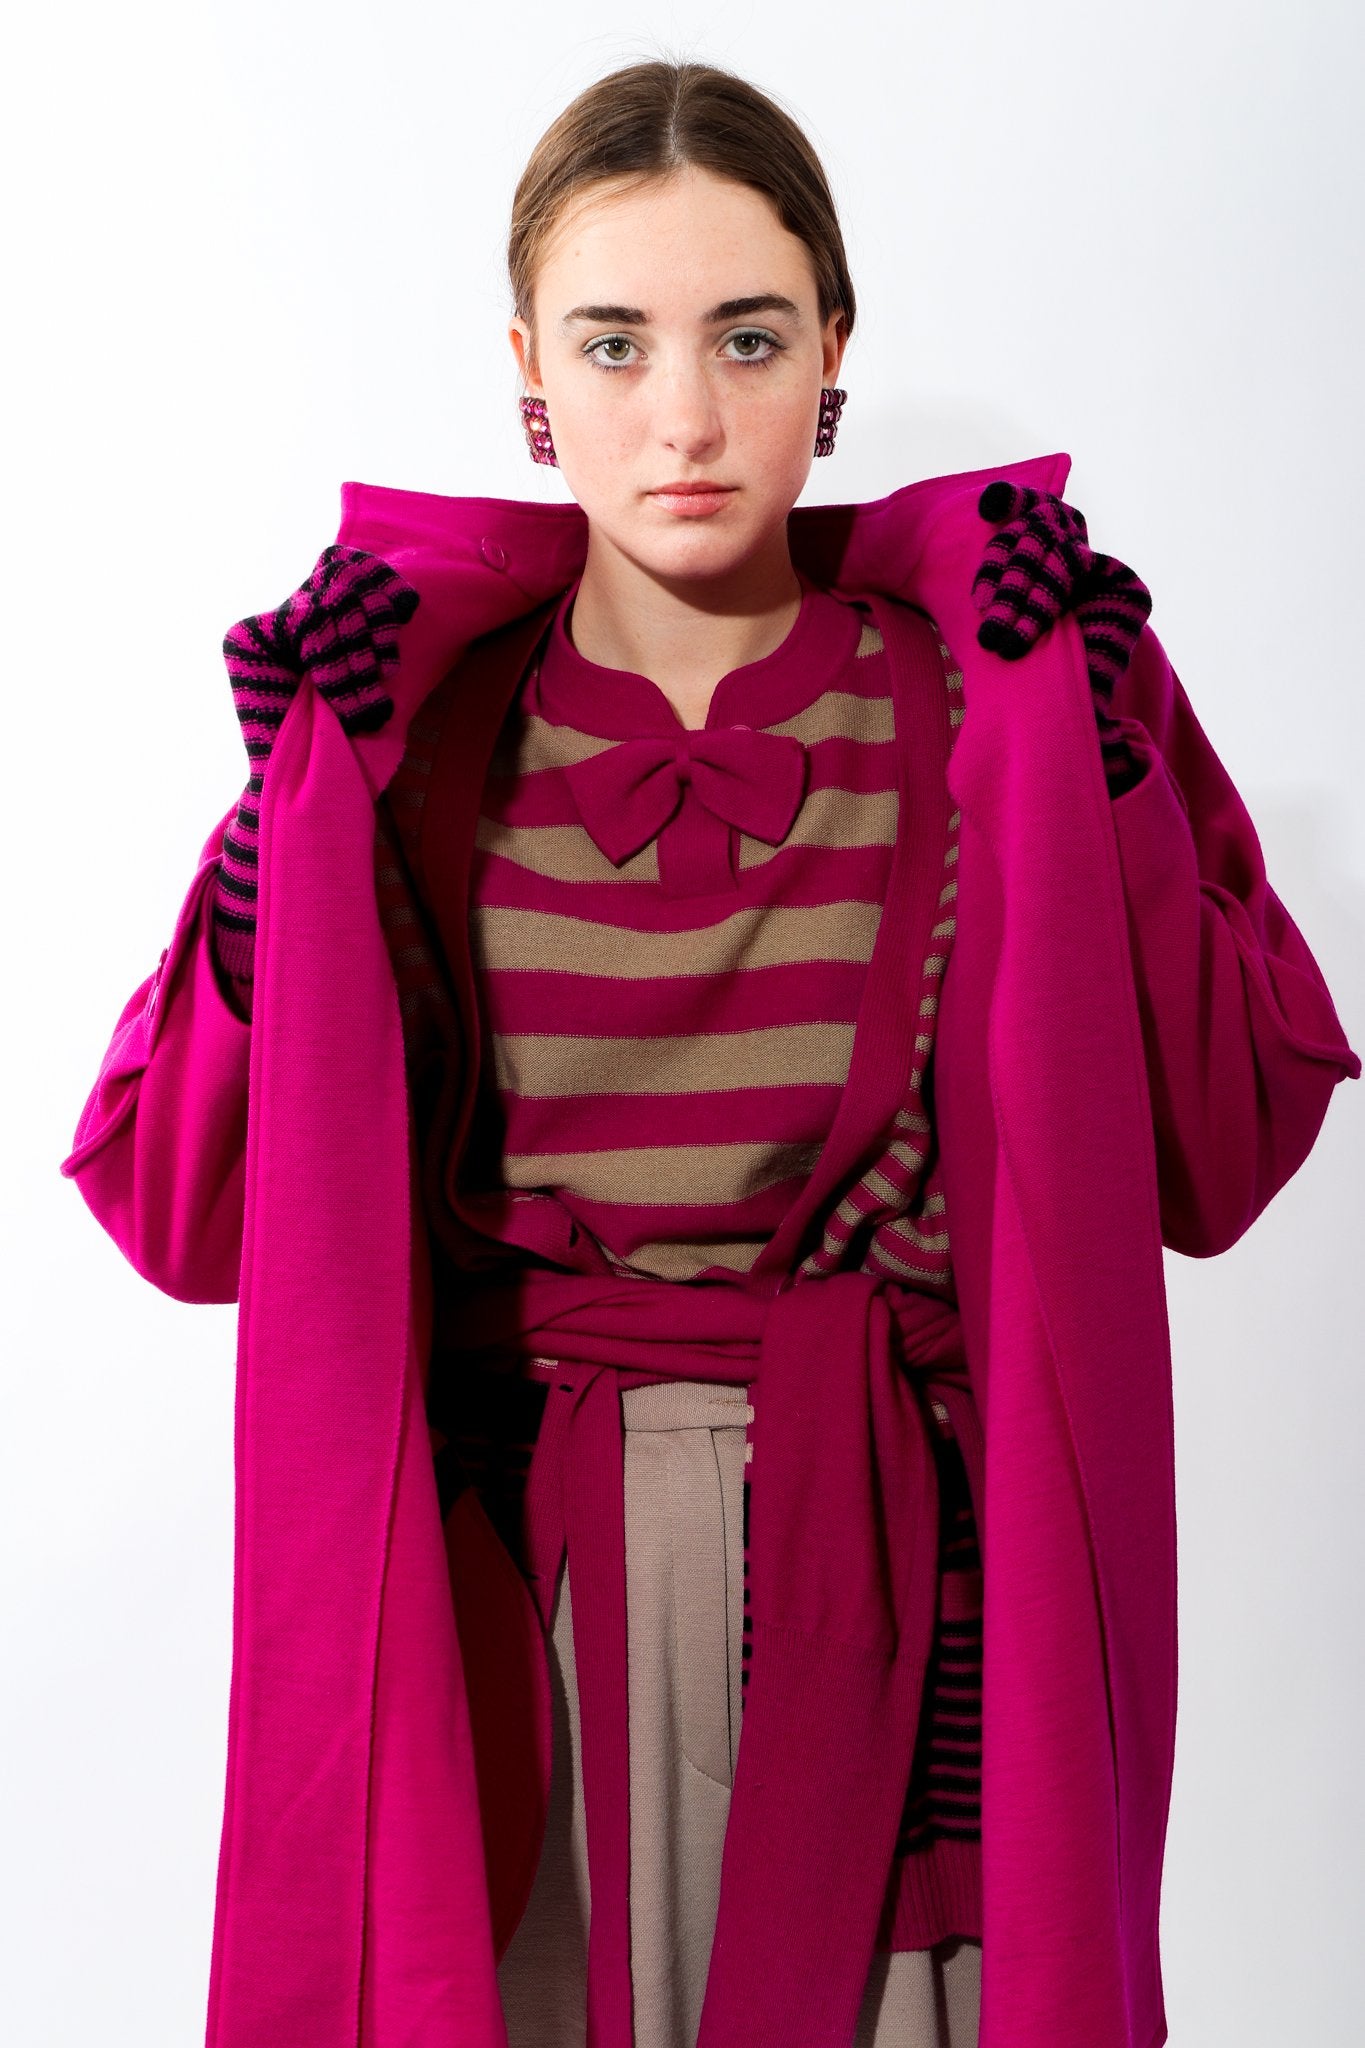 Girl wearing Vintage Sonia Rykiel Fuchsia Knit Cocoon Coat with striped sweater and striped gloves